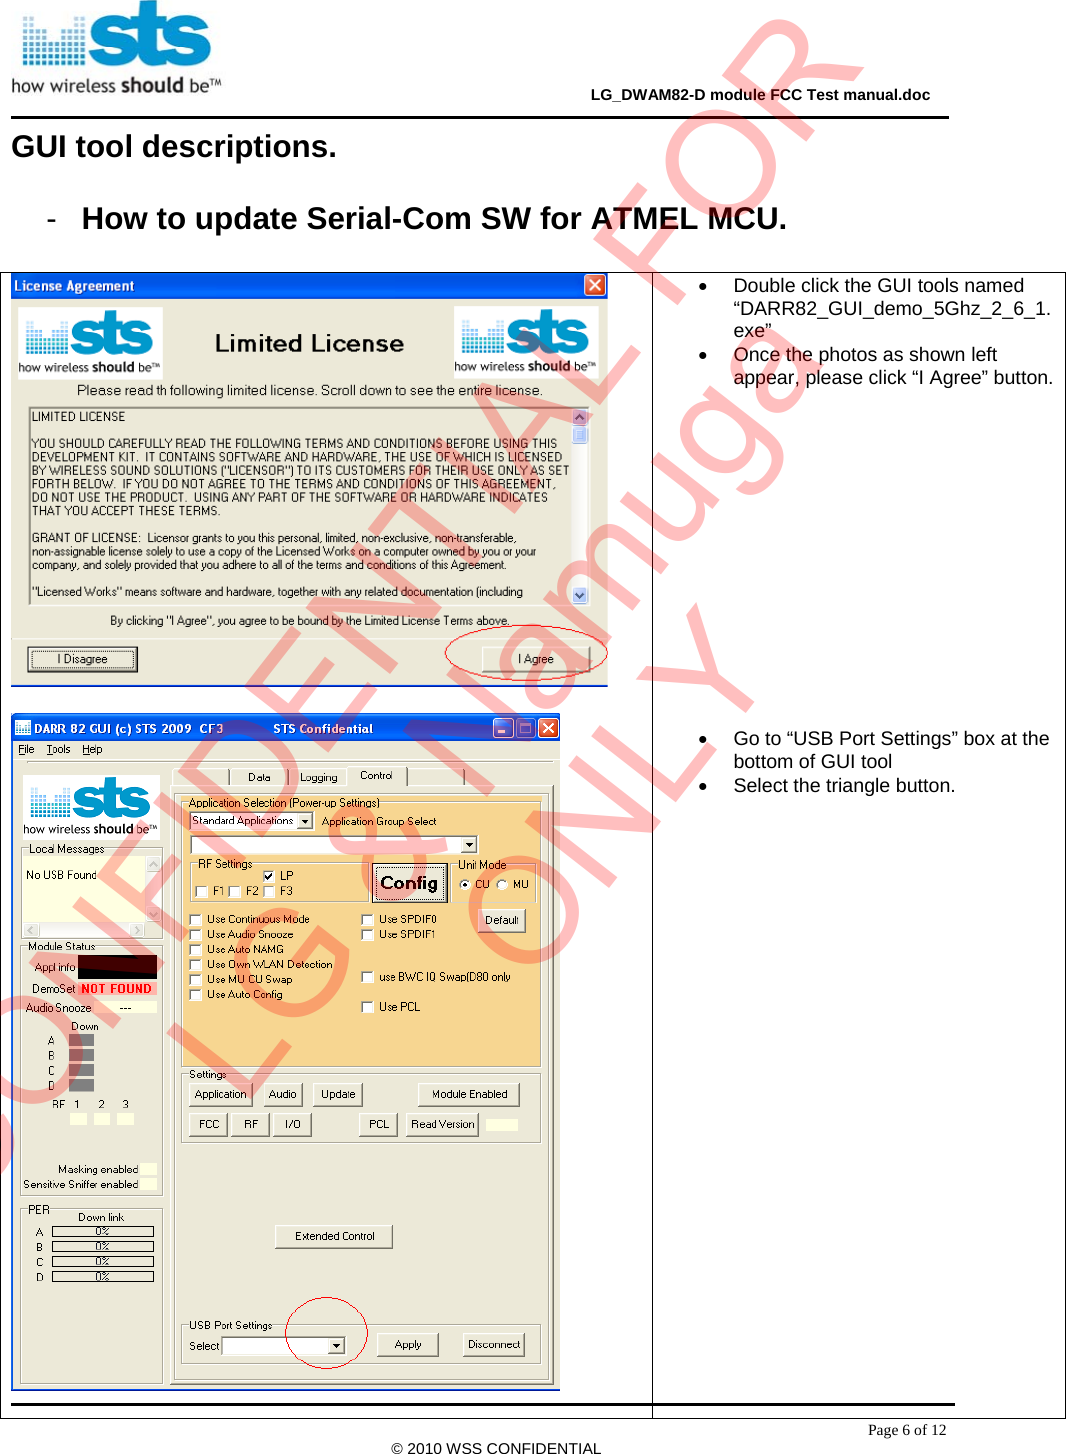                                                                                     LG_DWAM82-D module FCC Test manual.doc Page 6 of 12 © 2010 WSS CONFIDENTIAL GUI tool descriptions.  -  How to update Serial-Com SW for ATMEL MCU.      •  Double click the GUI tools named “DARR82_GUI_demo_5Ghz_2_6_1.exe” •  Once the photos as shown left appear, please click “I Agree” button.                •  Go to “USB Port Settings” box at the bottom of GUI tool •  Select the triangle button.                            CONFIDENTIAL FORLG &amp; NamugaONLY